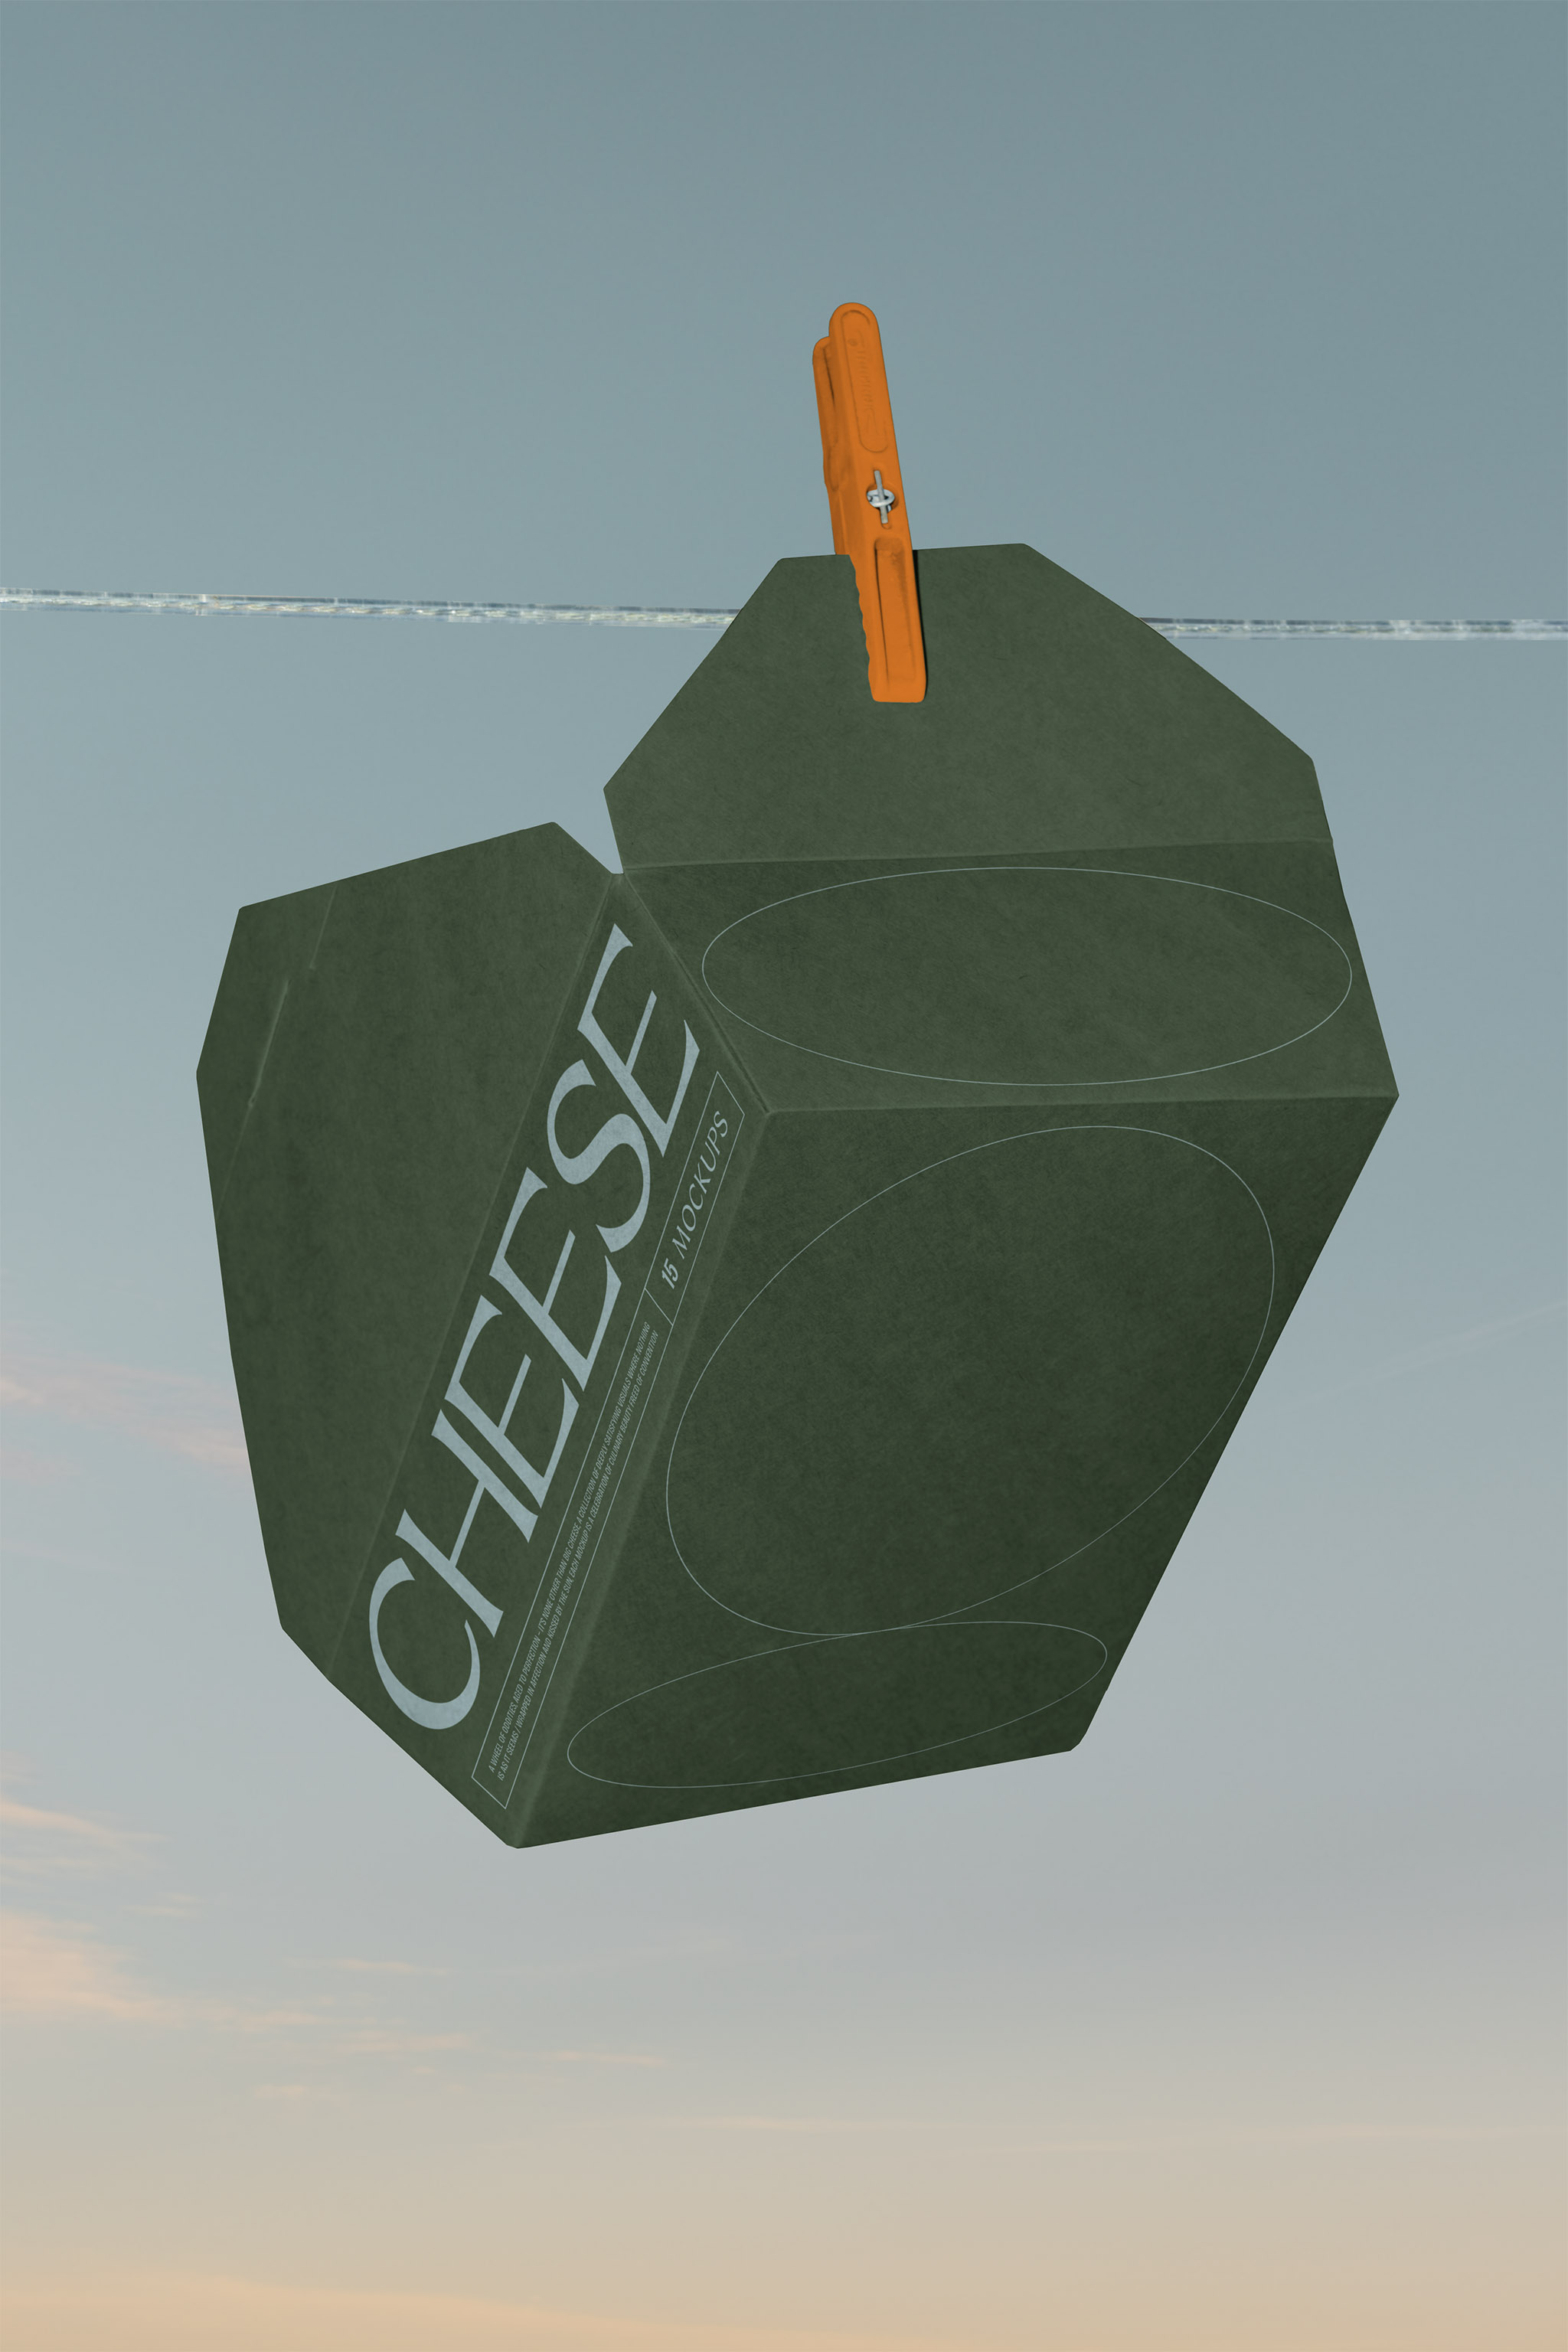 Creative conceptual photo mockup of a kraft meal box with branded food packaging design hung on a clothing line with a clothespin and set against a dusky sky, in use example alternative colors.